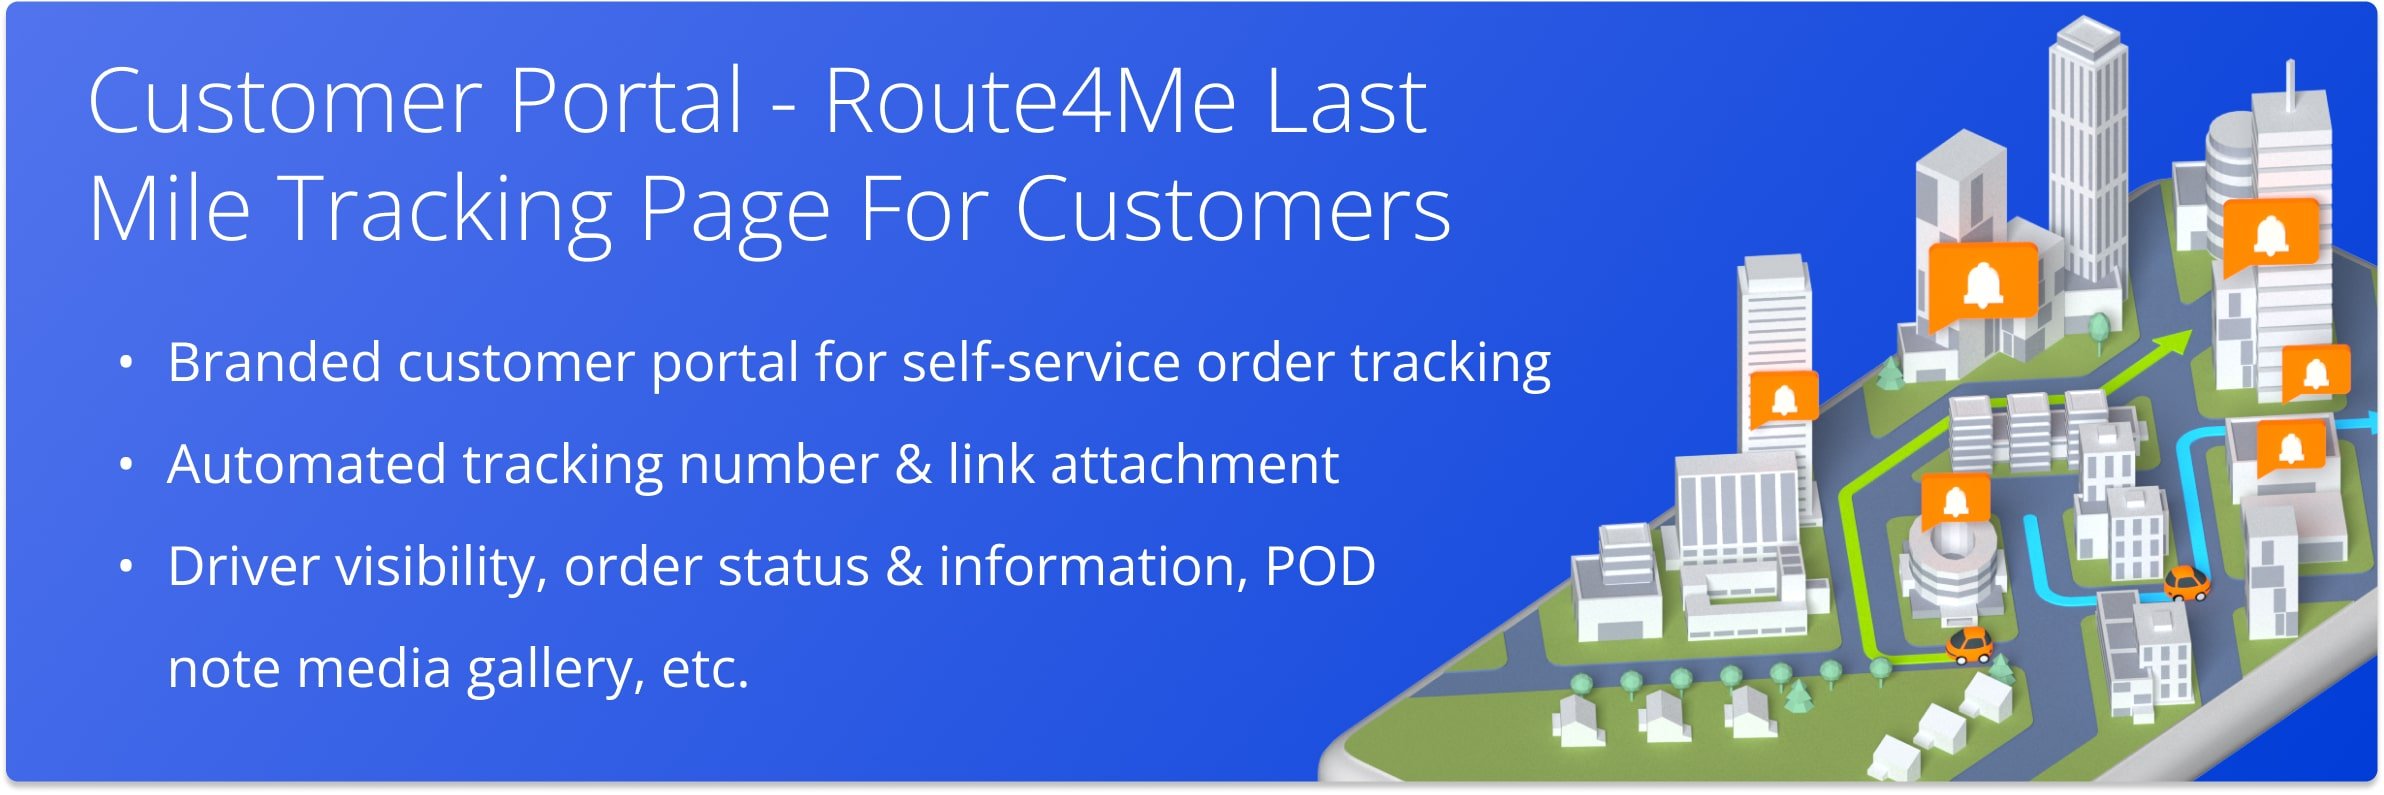 Provide track and trace capabilities to your customers with a branded and customizable online order tracking portal for customers.